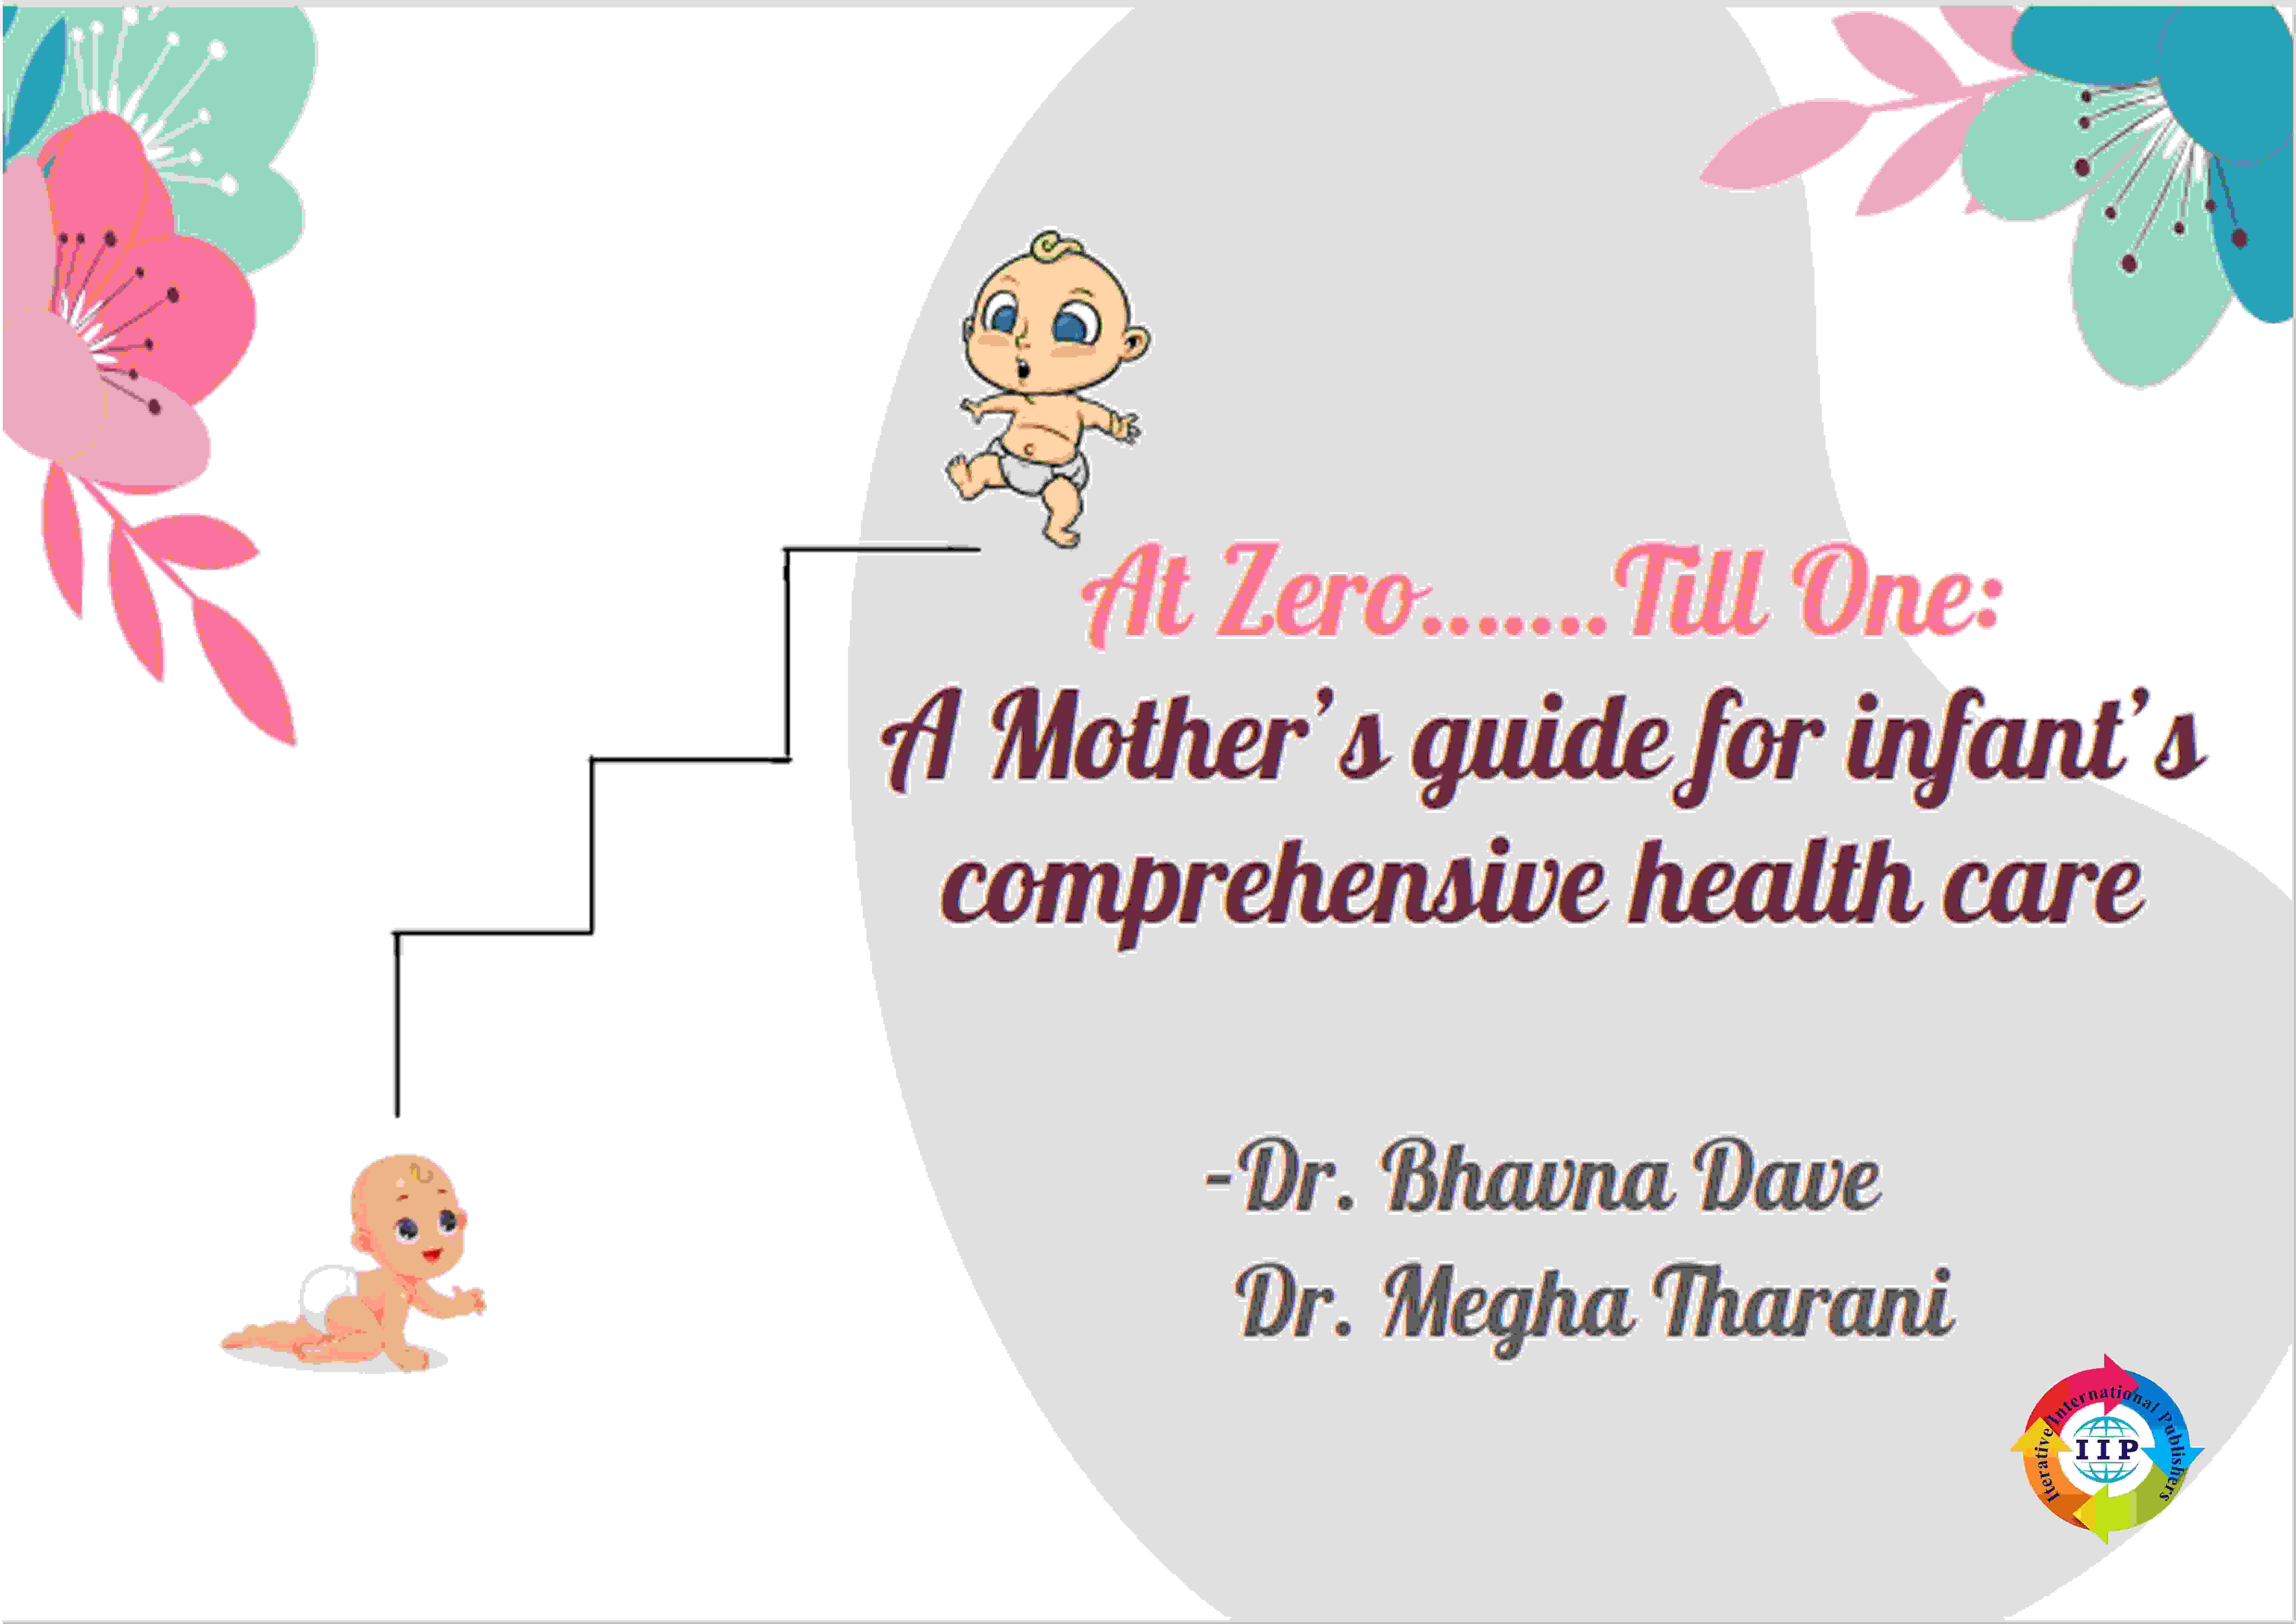 AT ZERO TILL ONE...A MOTHER'S GUIDE FOR INFANT'S COMPREHENSIVE HEALTH CARE